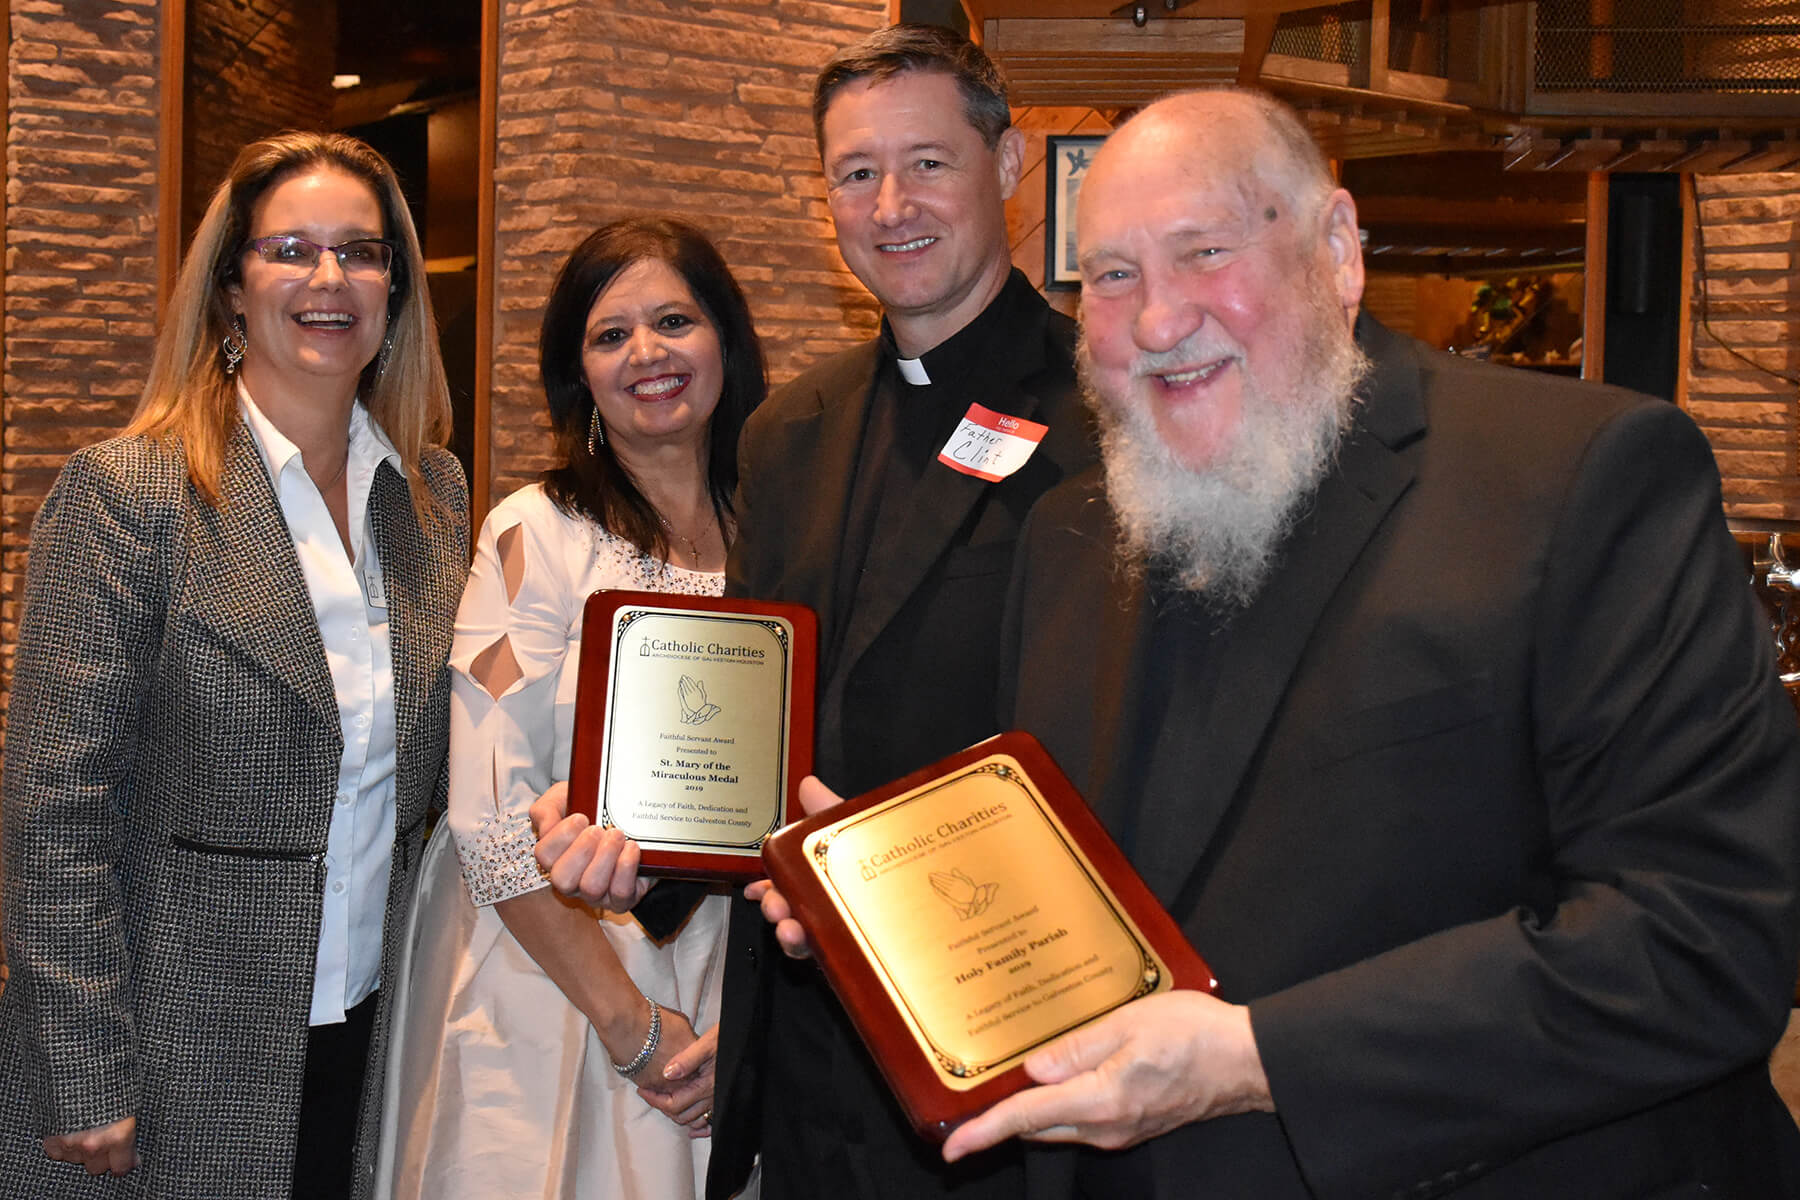 Beacon of Hope Reception thanked Rev. Clint Ressler, pastor of St. Mary of the Miraculous Medal in Texas City, and Fr. Stephen Payne with Holy Family Parish in Galveston.